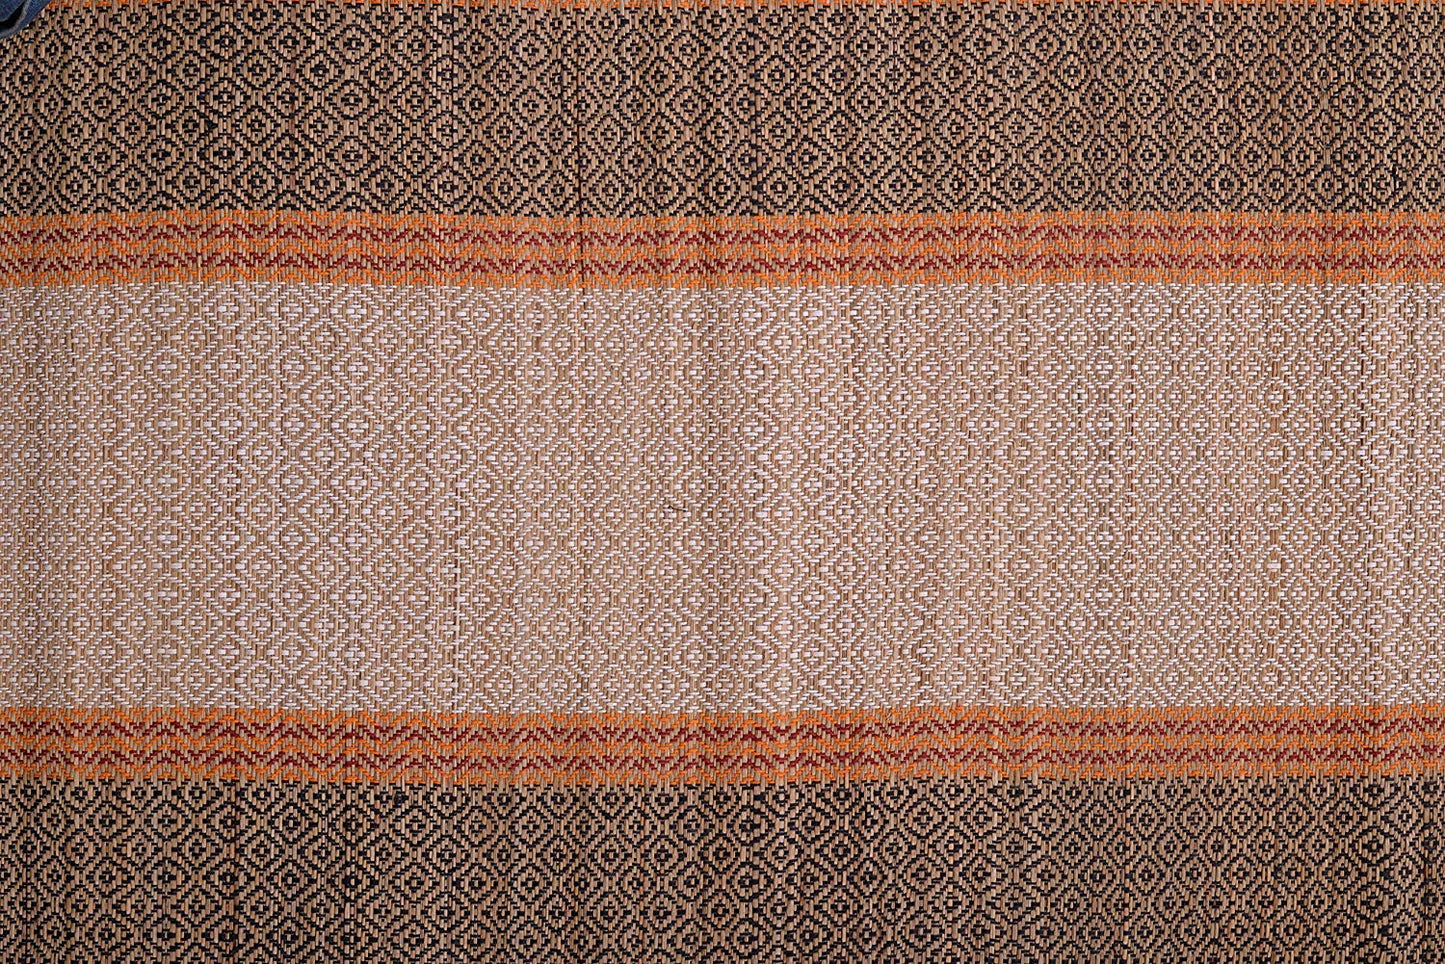 Chatai Mat Foldable handwoven Organic made of Madurkathi Grass for Multipurpose Use - T3-16